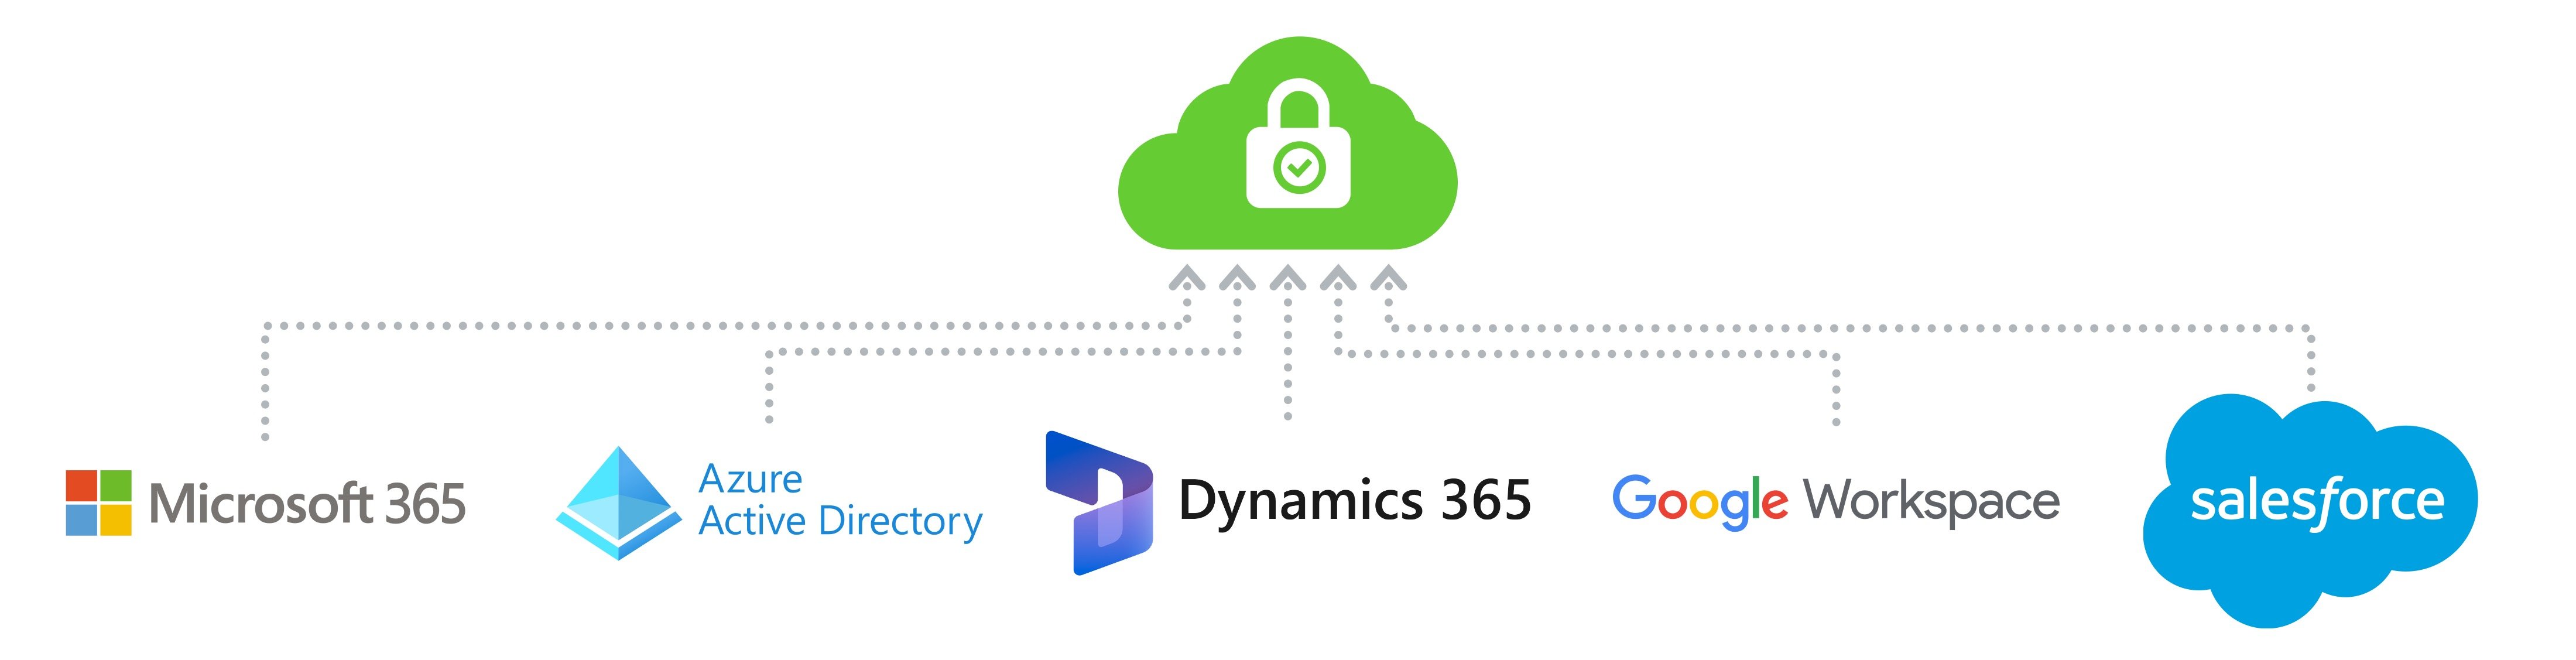 Automatic Off-Site Backup of SaaS Data, including Microsoft 365, Azure Active Directory, Microsoft Dynamics 365, Google Workspace and Salesforce